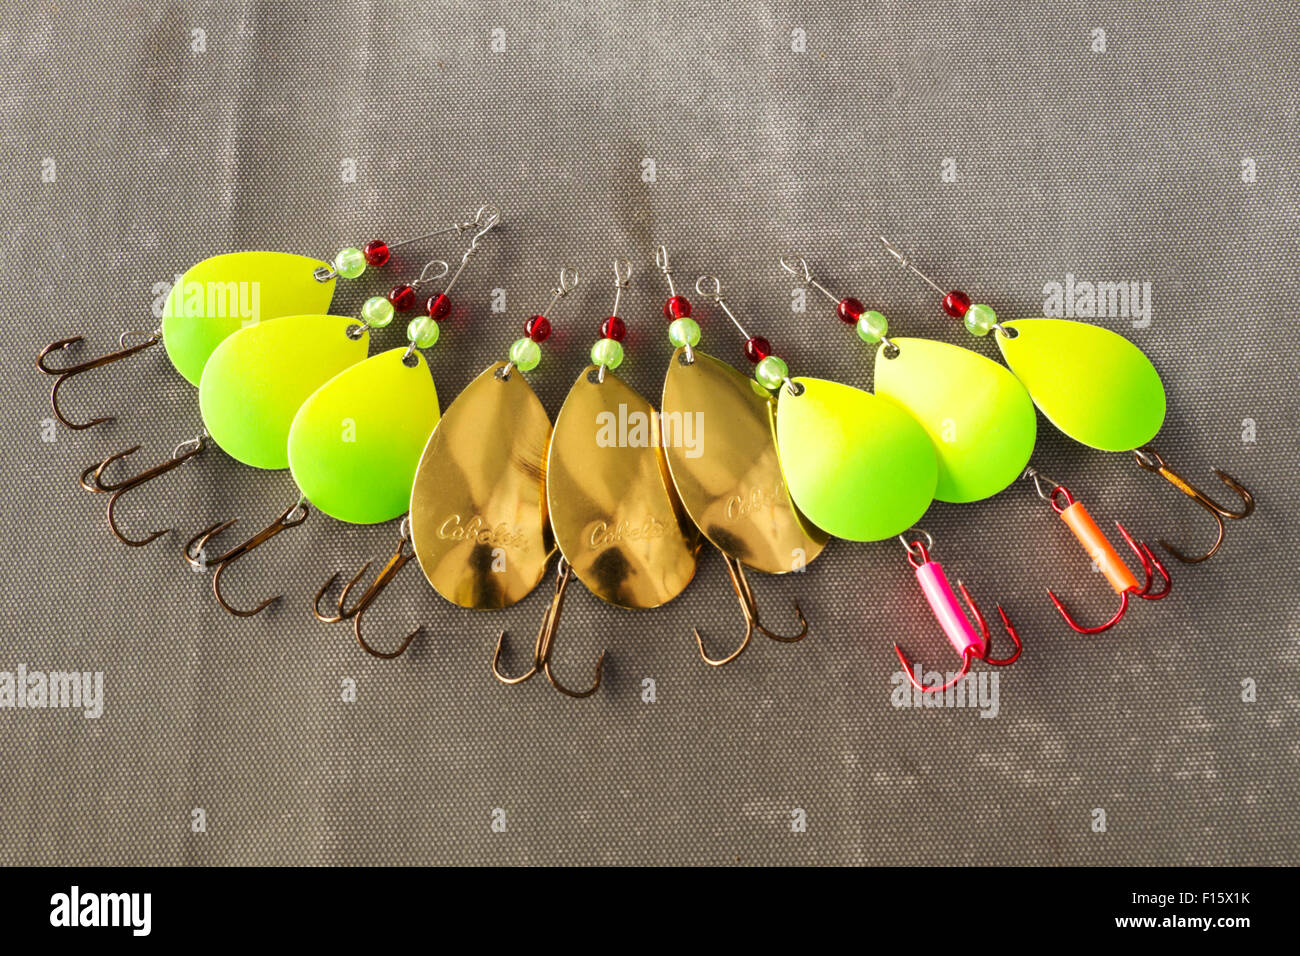 A collection of homemade spinner baits for sport fishing. Stock Photo